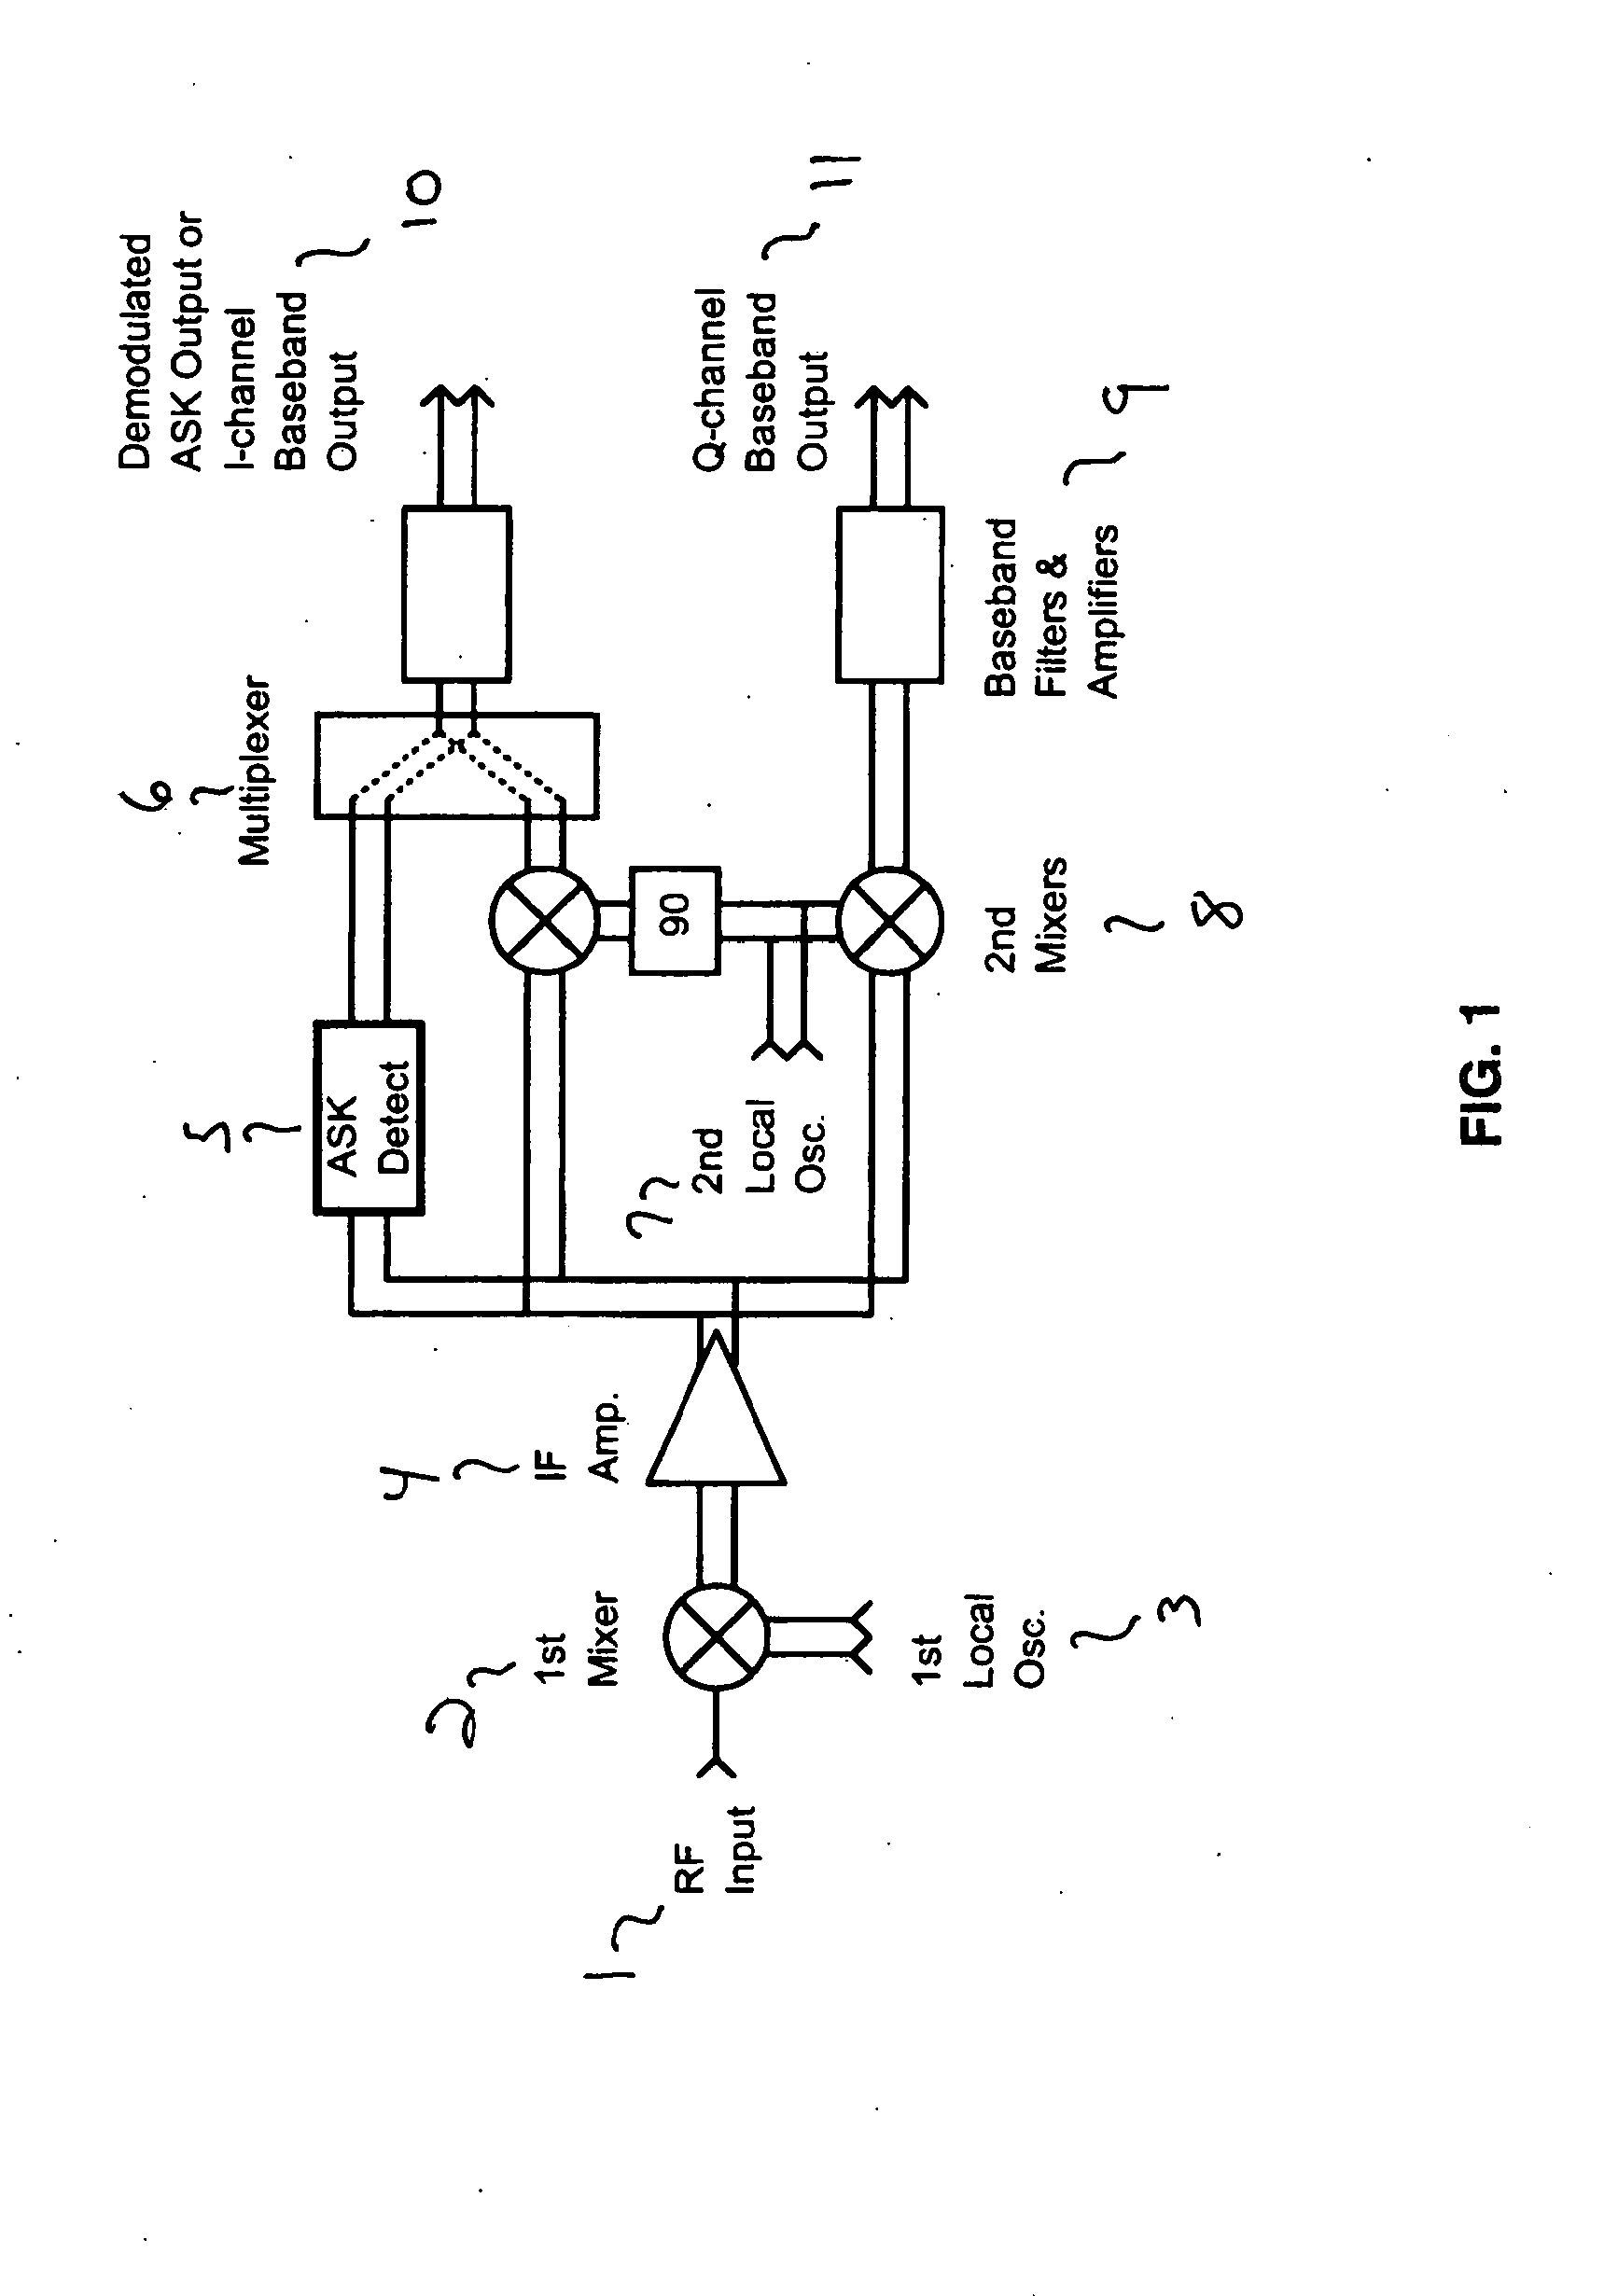 Receiver and integrated am-fm/iq demodulators for gigabit-rate data detection